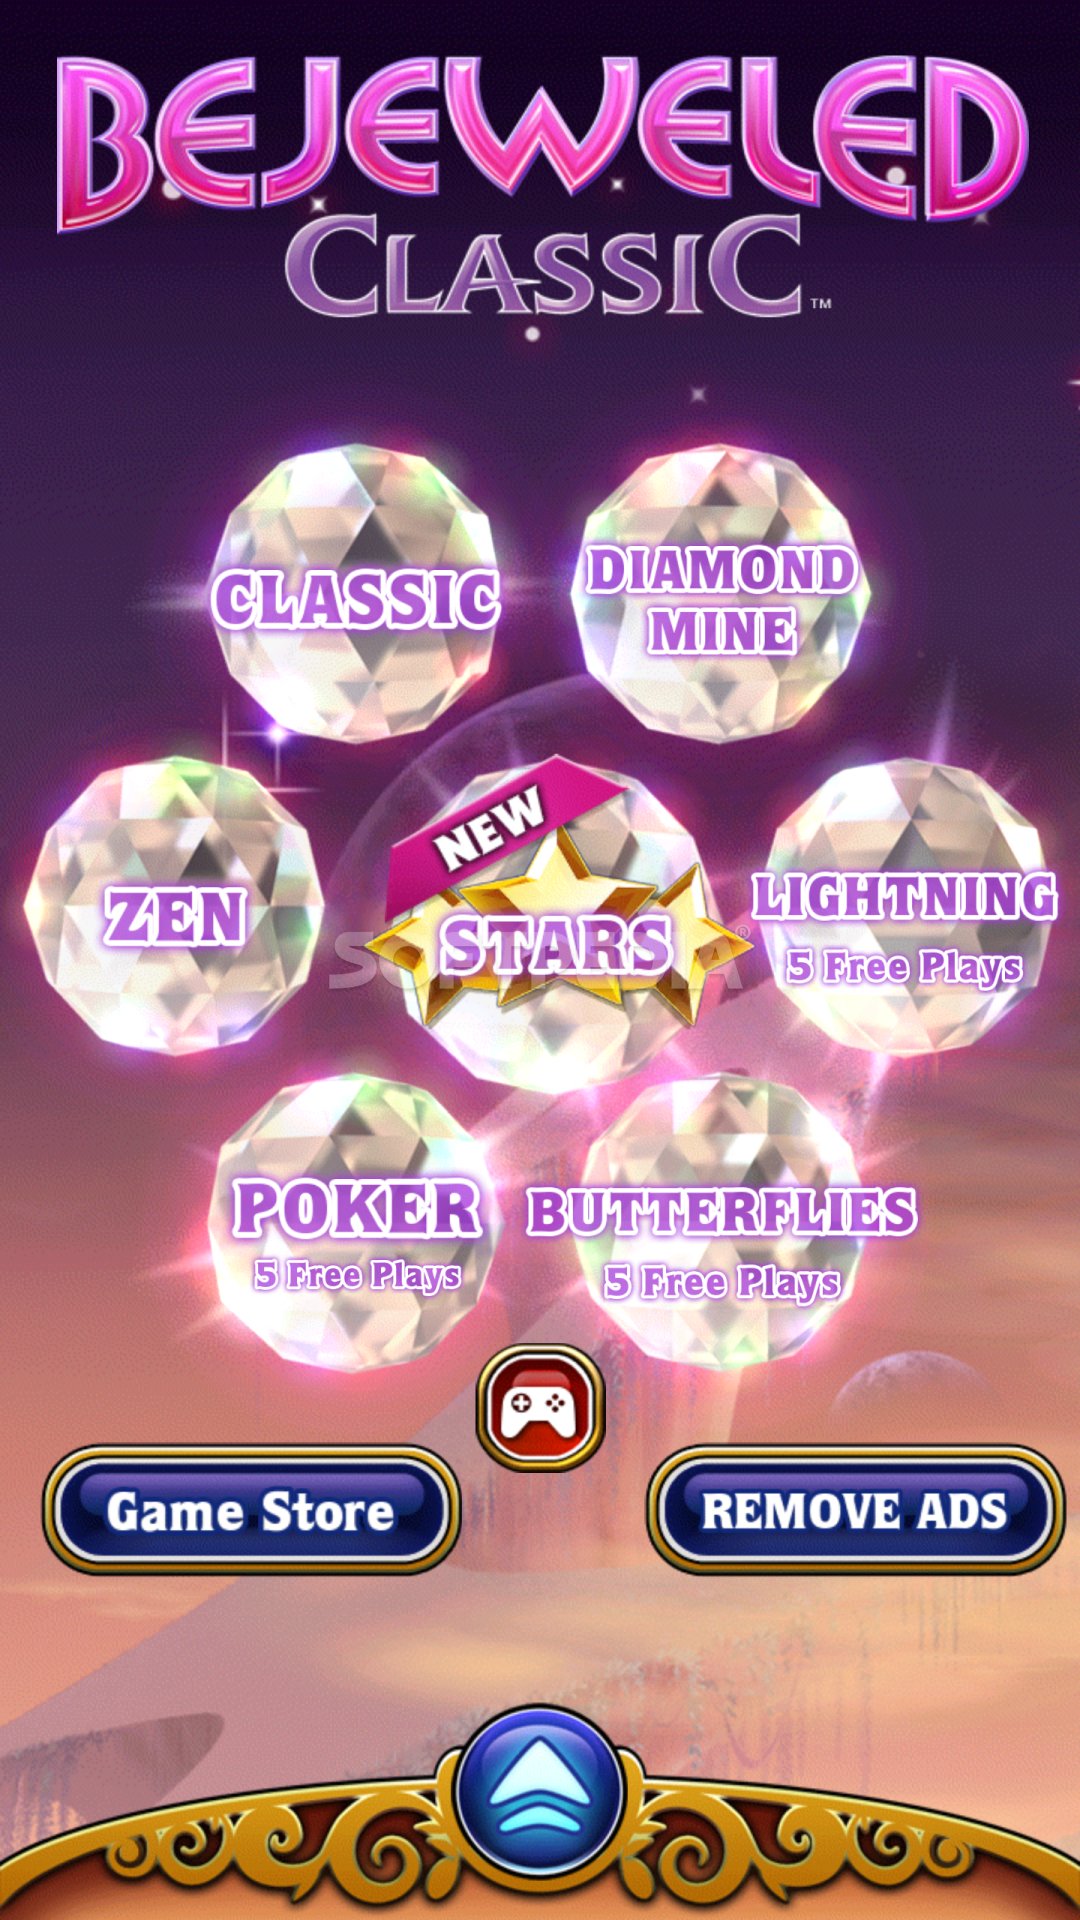 Bejeweled Classic free. download full Version